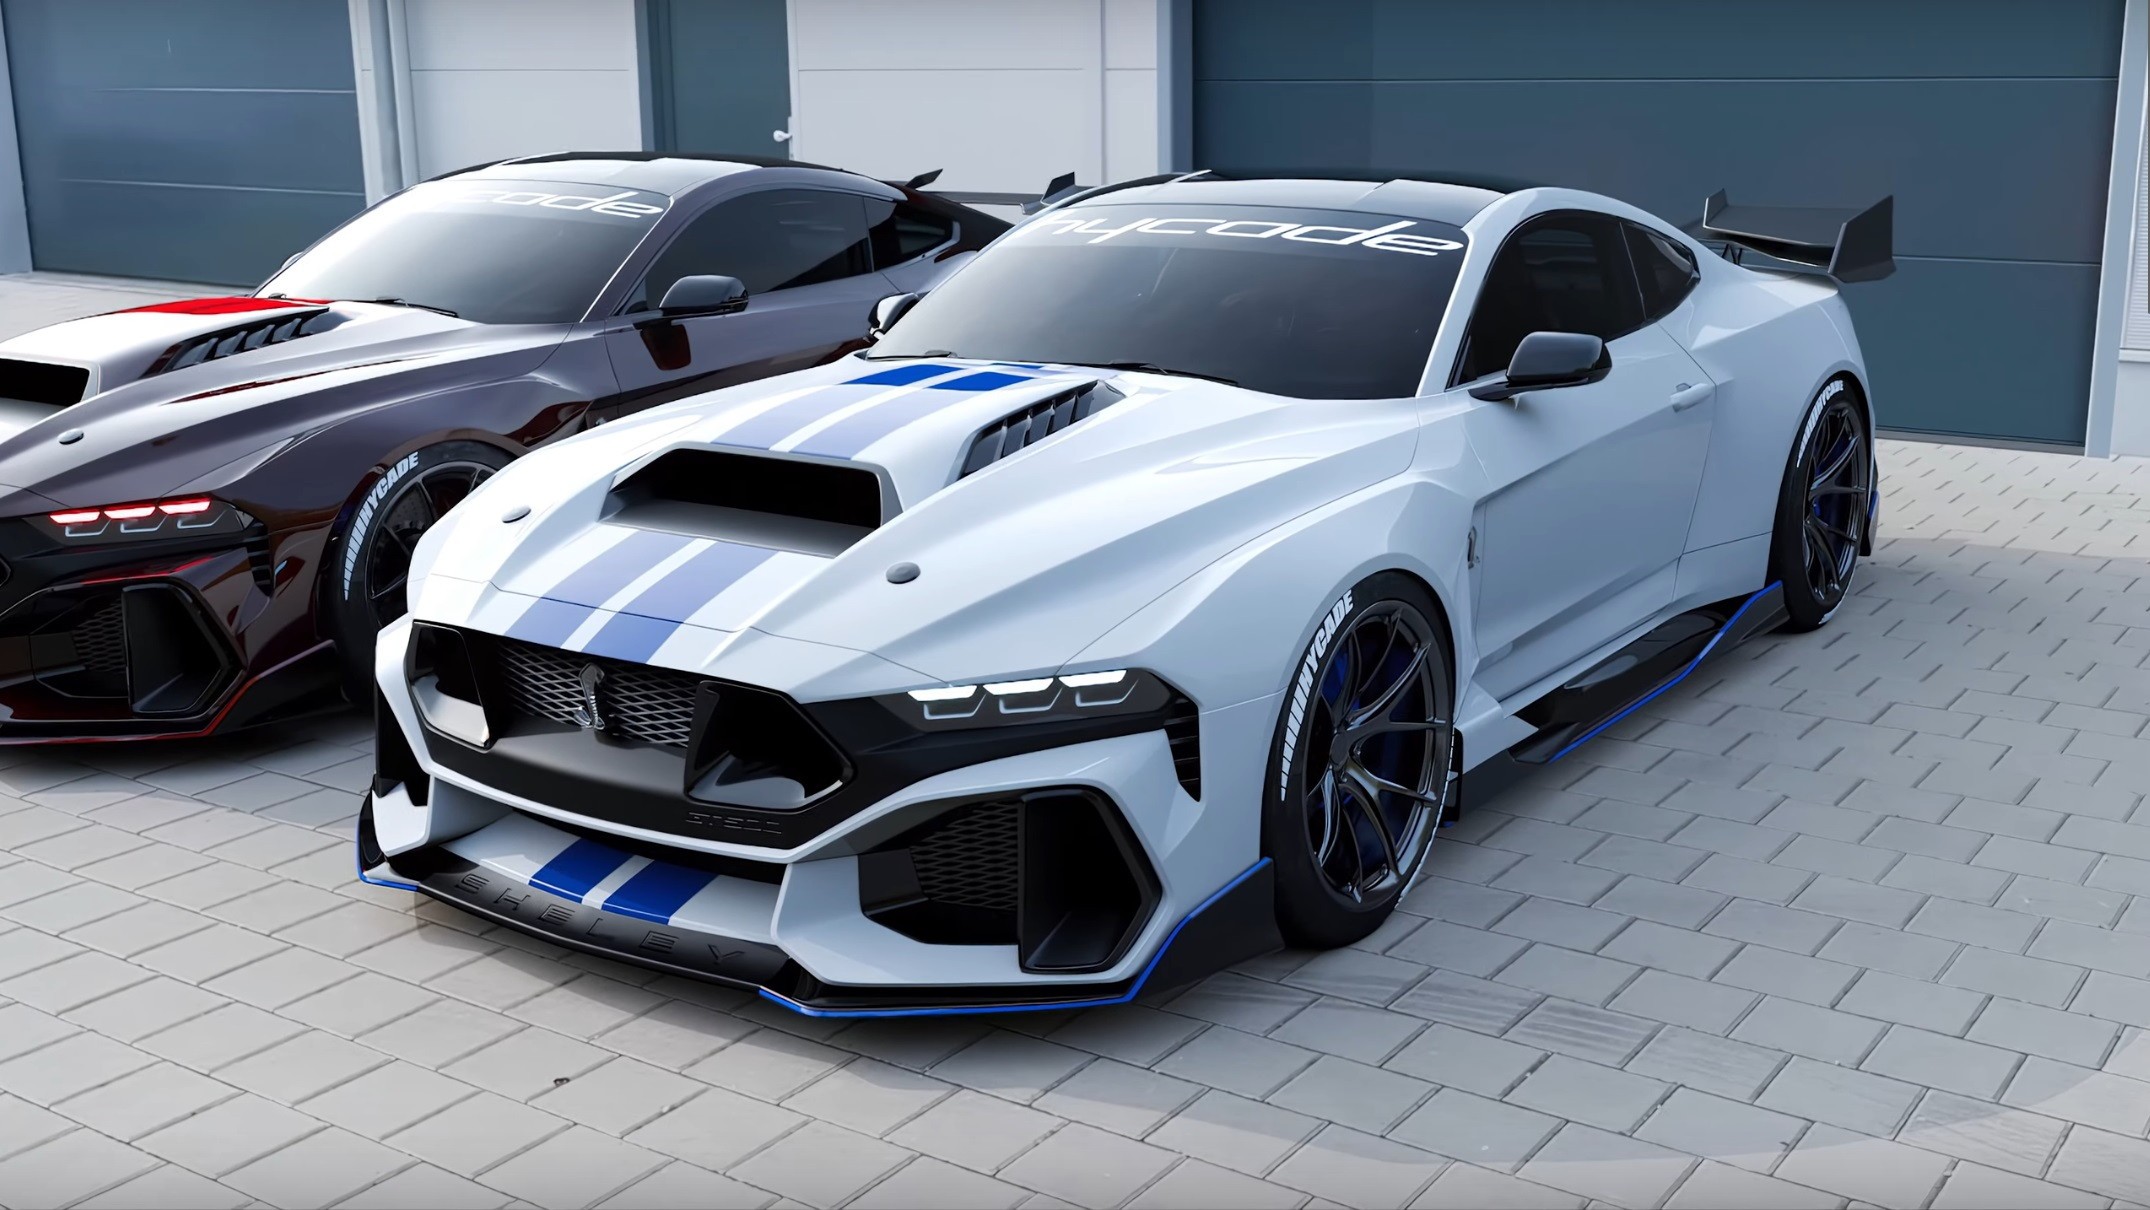 https://s1.cdn.autoevolution.com/images/news/gallery/2024-ford-mustang-shelby-gt500-imagined-doesnt-give-a-flying-hoot-about-electricity_4.jpg